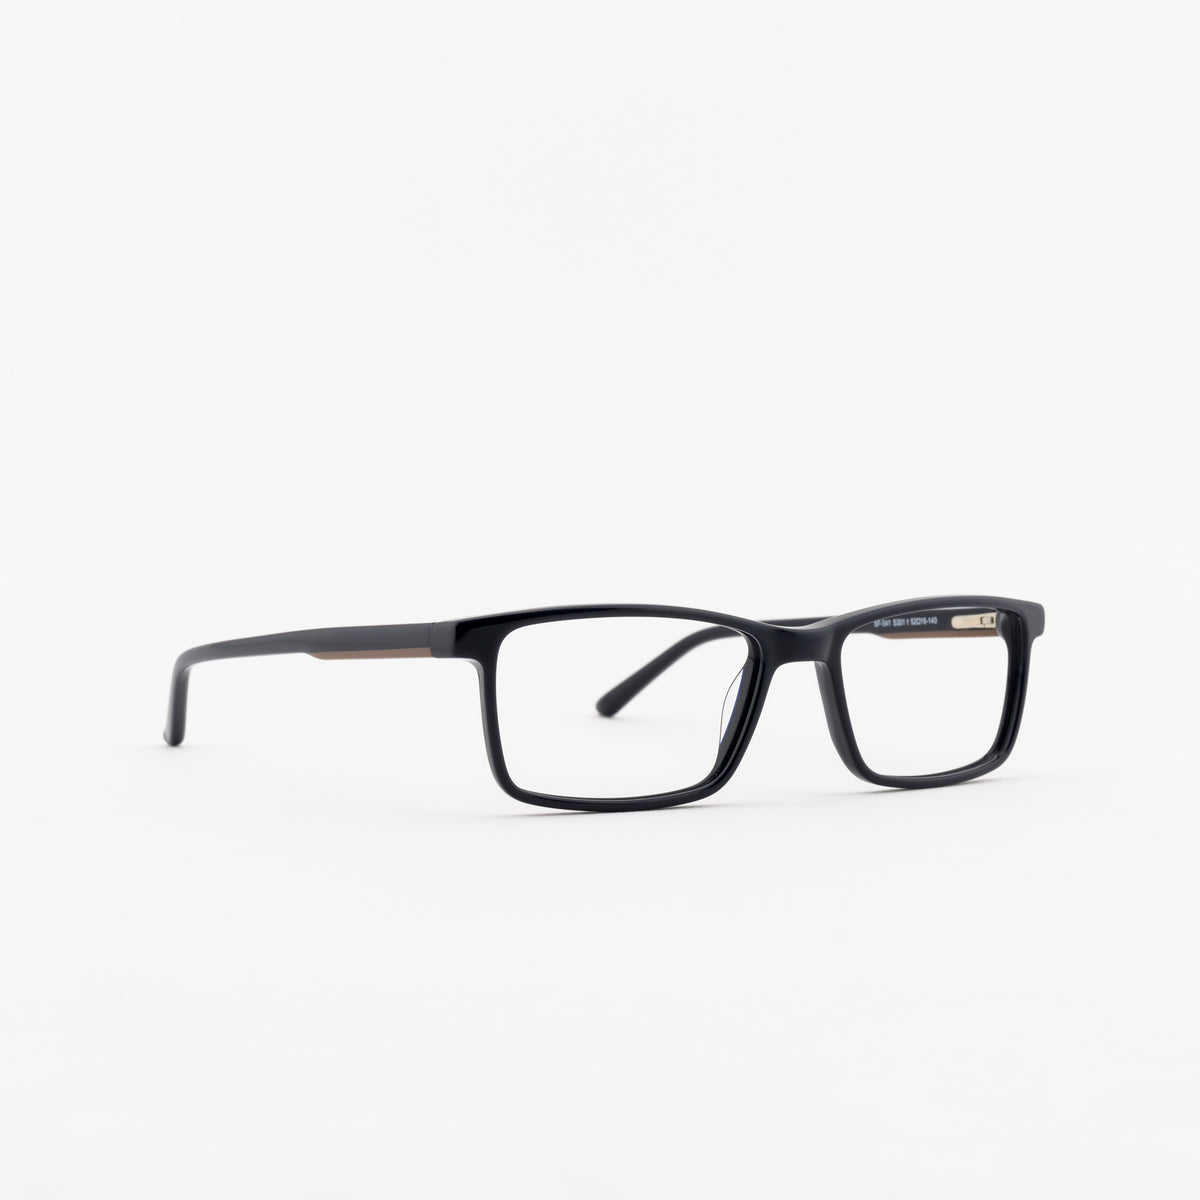 SF-541 Frames Superflex 52 S301 - NAVY BROWN Not Available